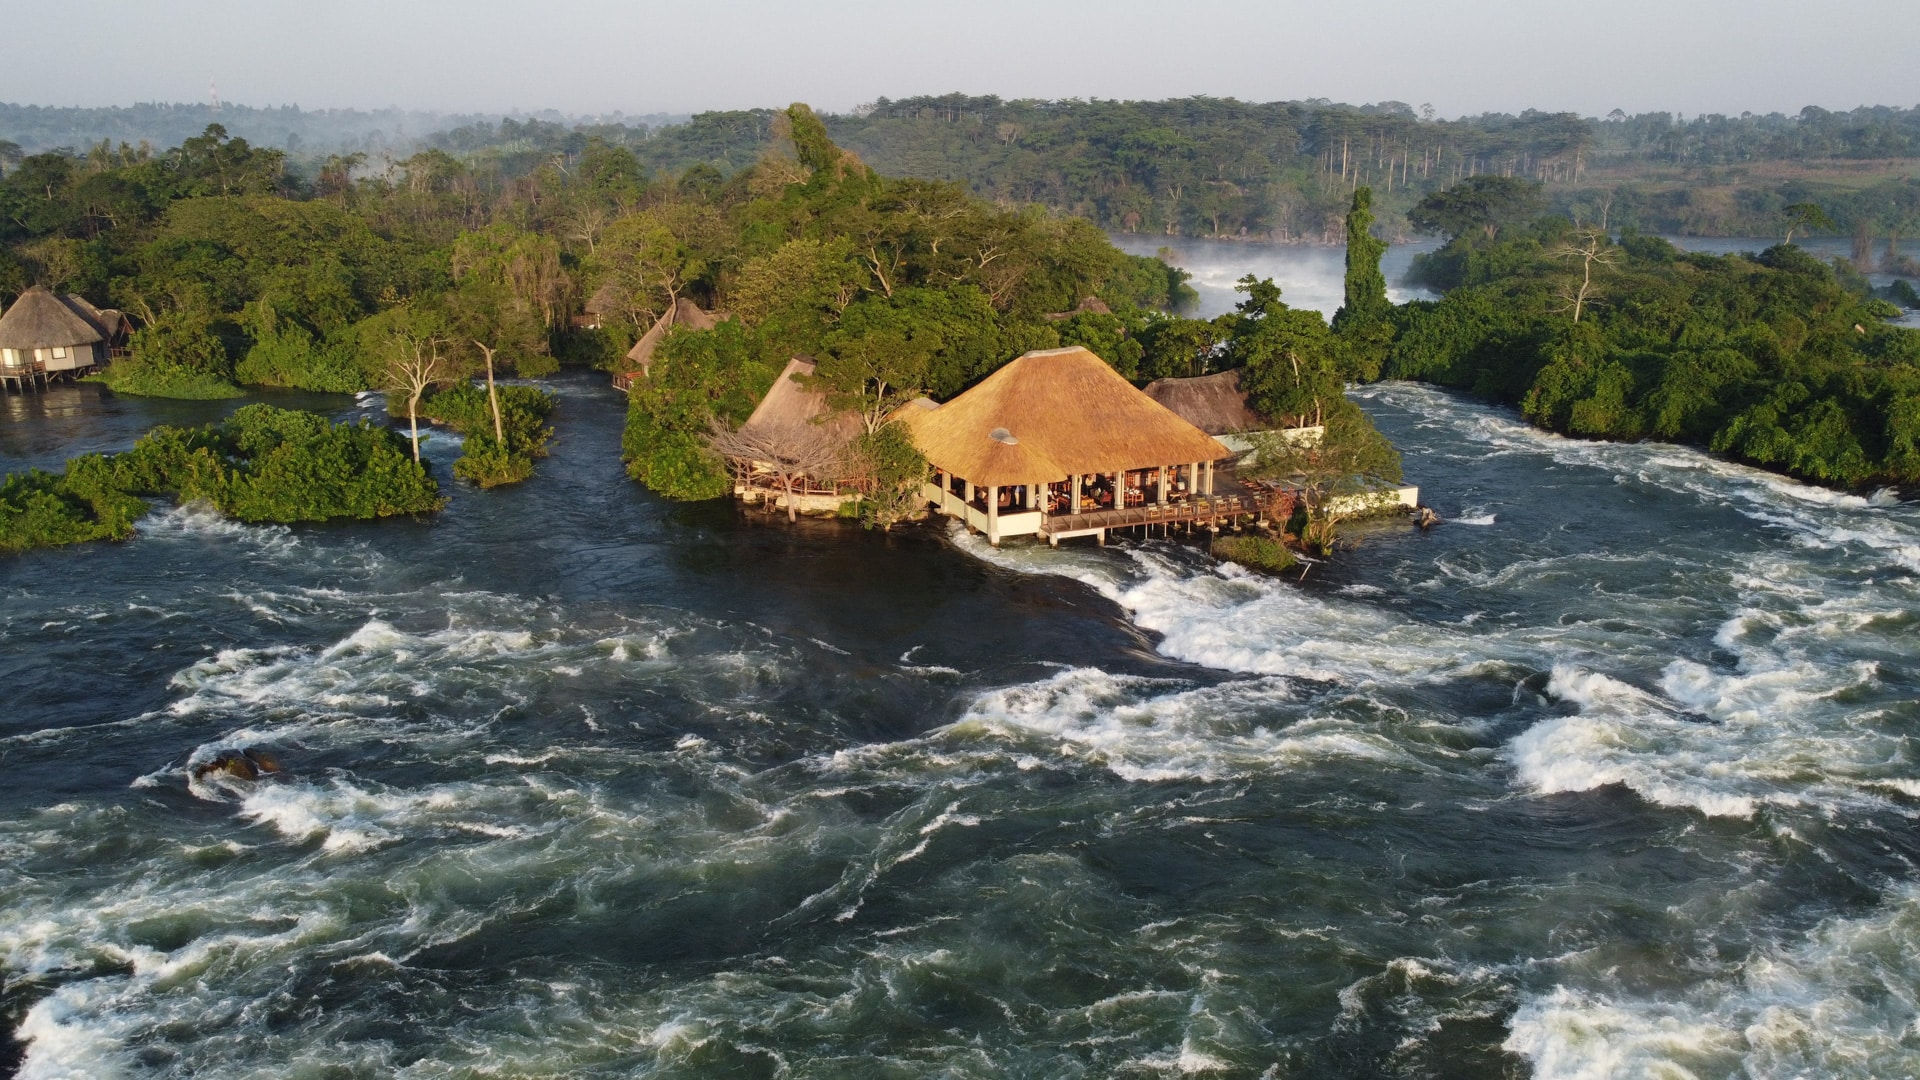 A birds eye view of the stunning Lemala Wildwaters Lodge - luxury accommodation along the Nile River in Uganda.